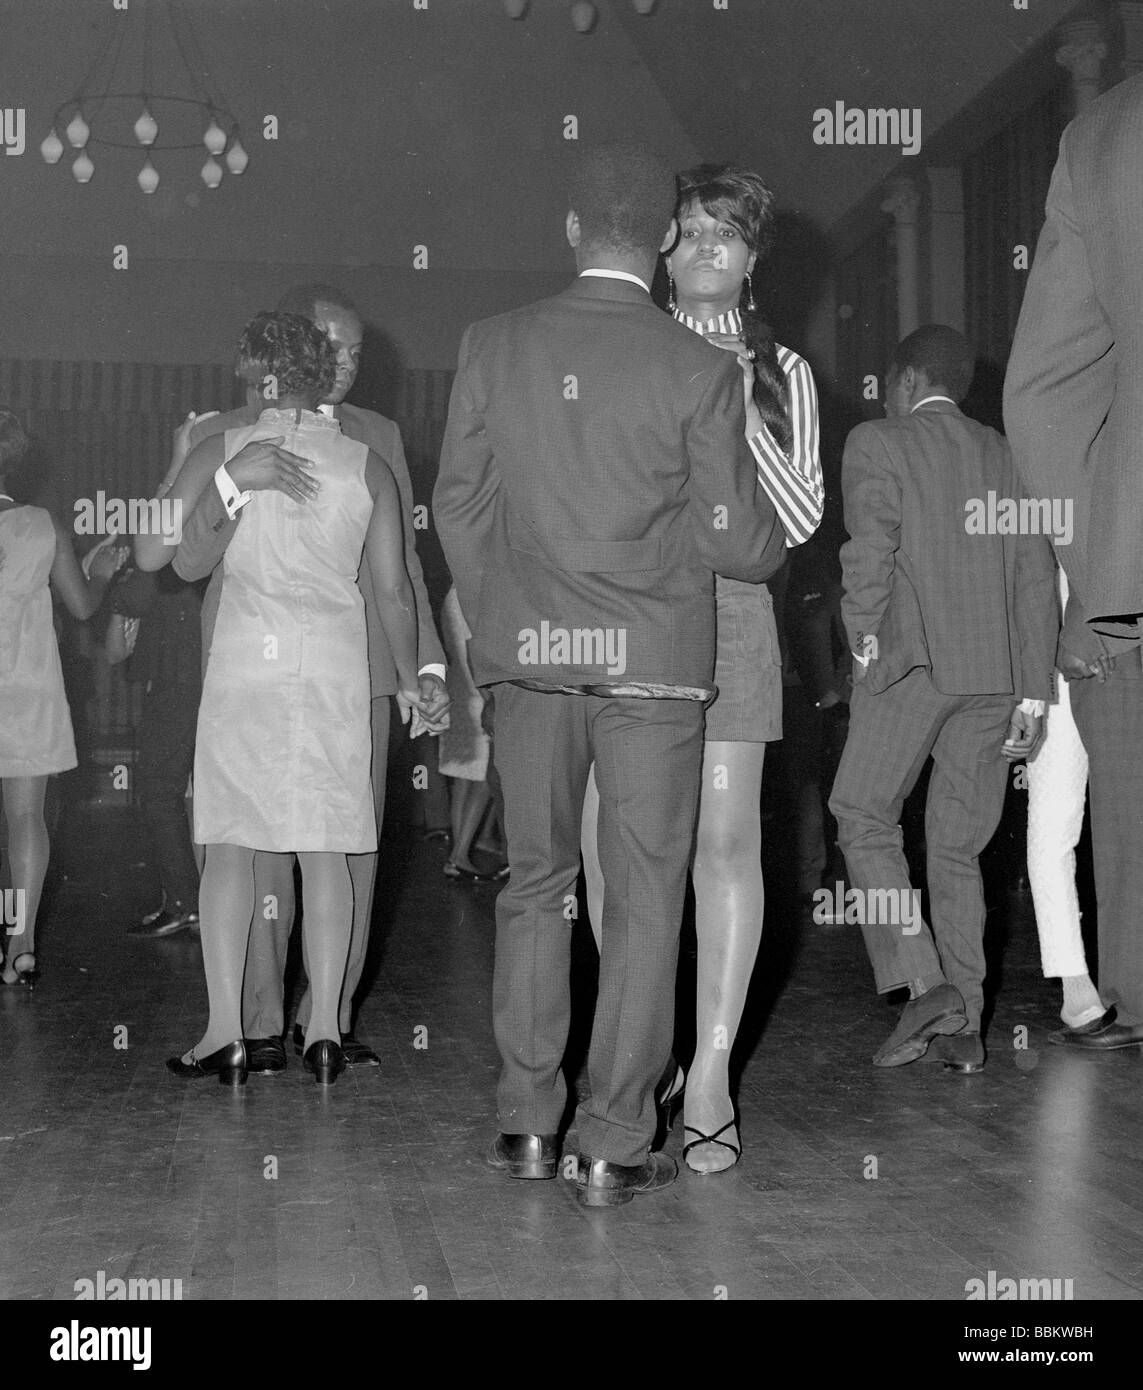 MINI GONNA BALL a Ealing Town Hall nel 1968 Foto Stock